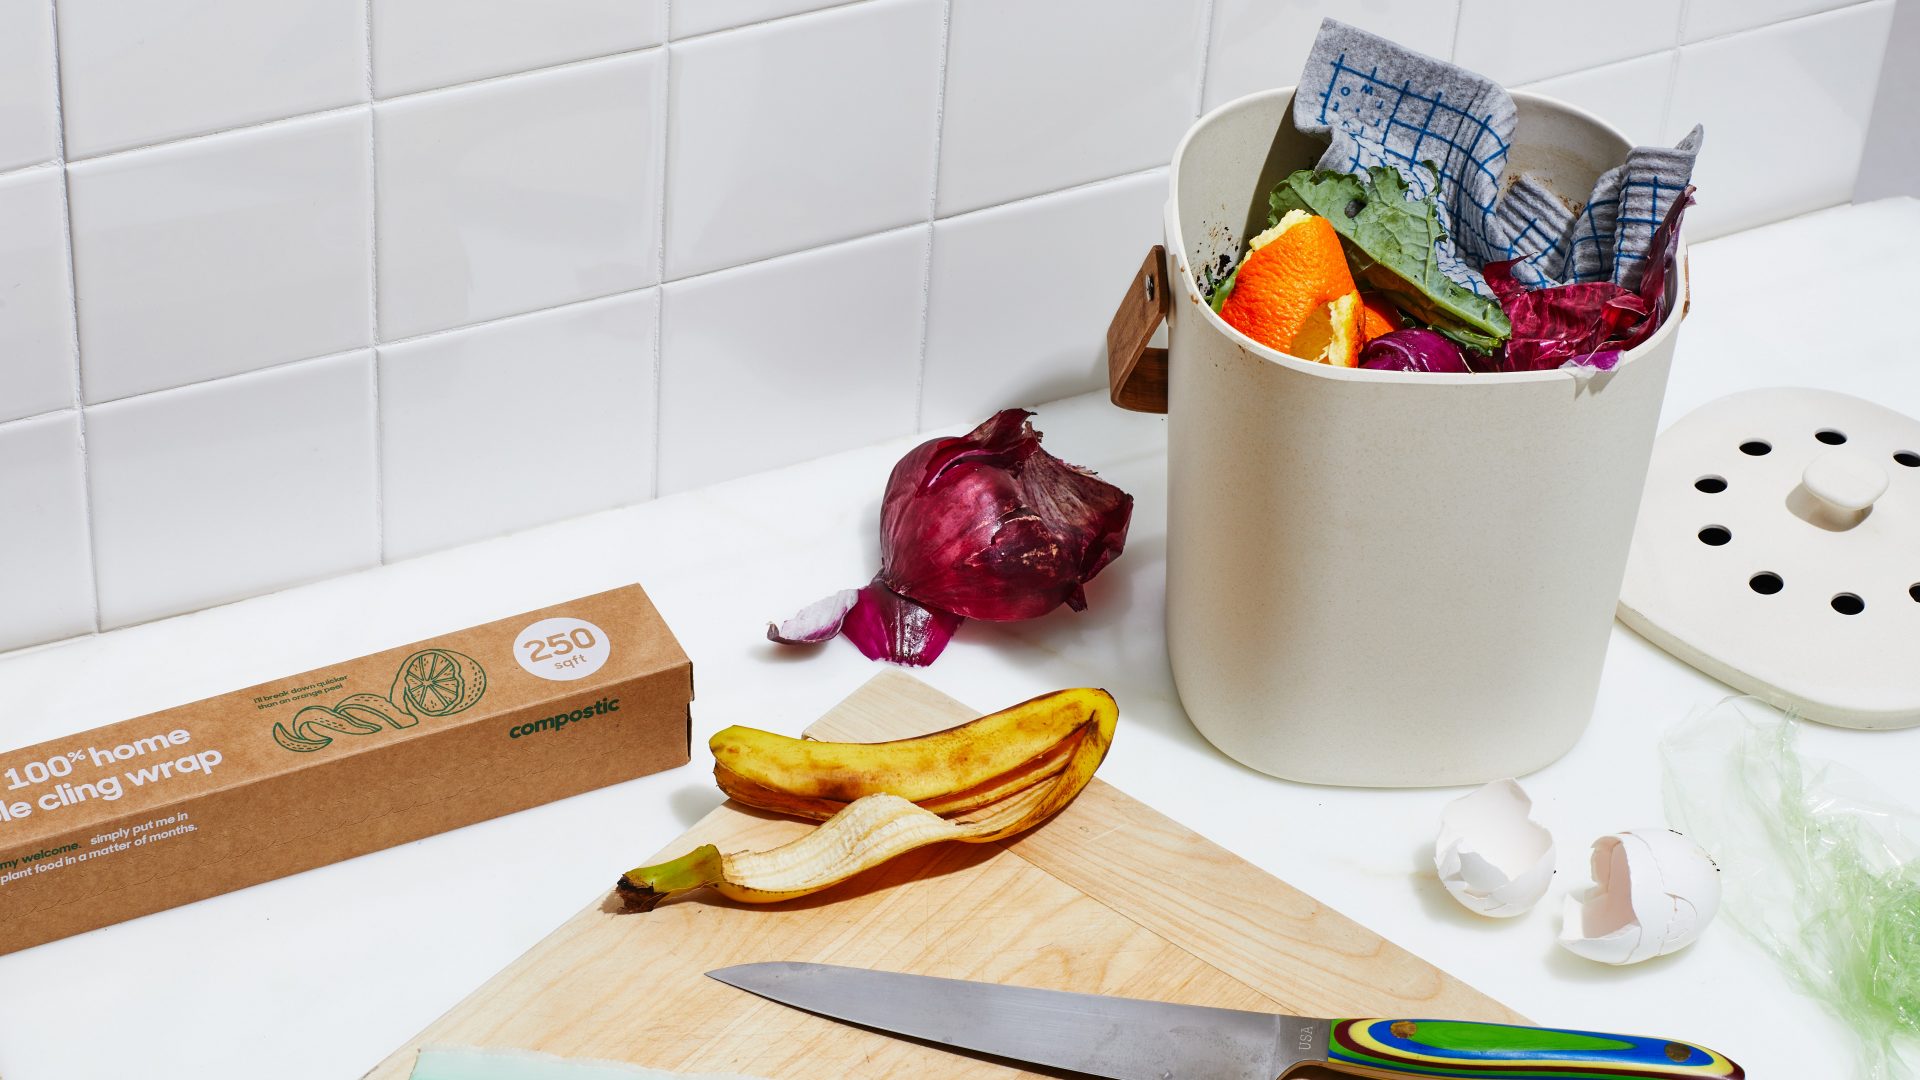 Swap in These 6 Contemporary Compostable Kitchen Merchandise